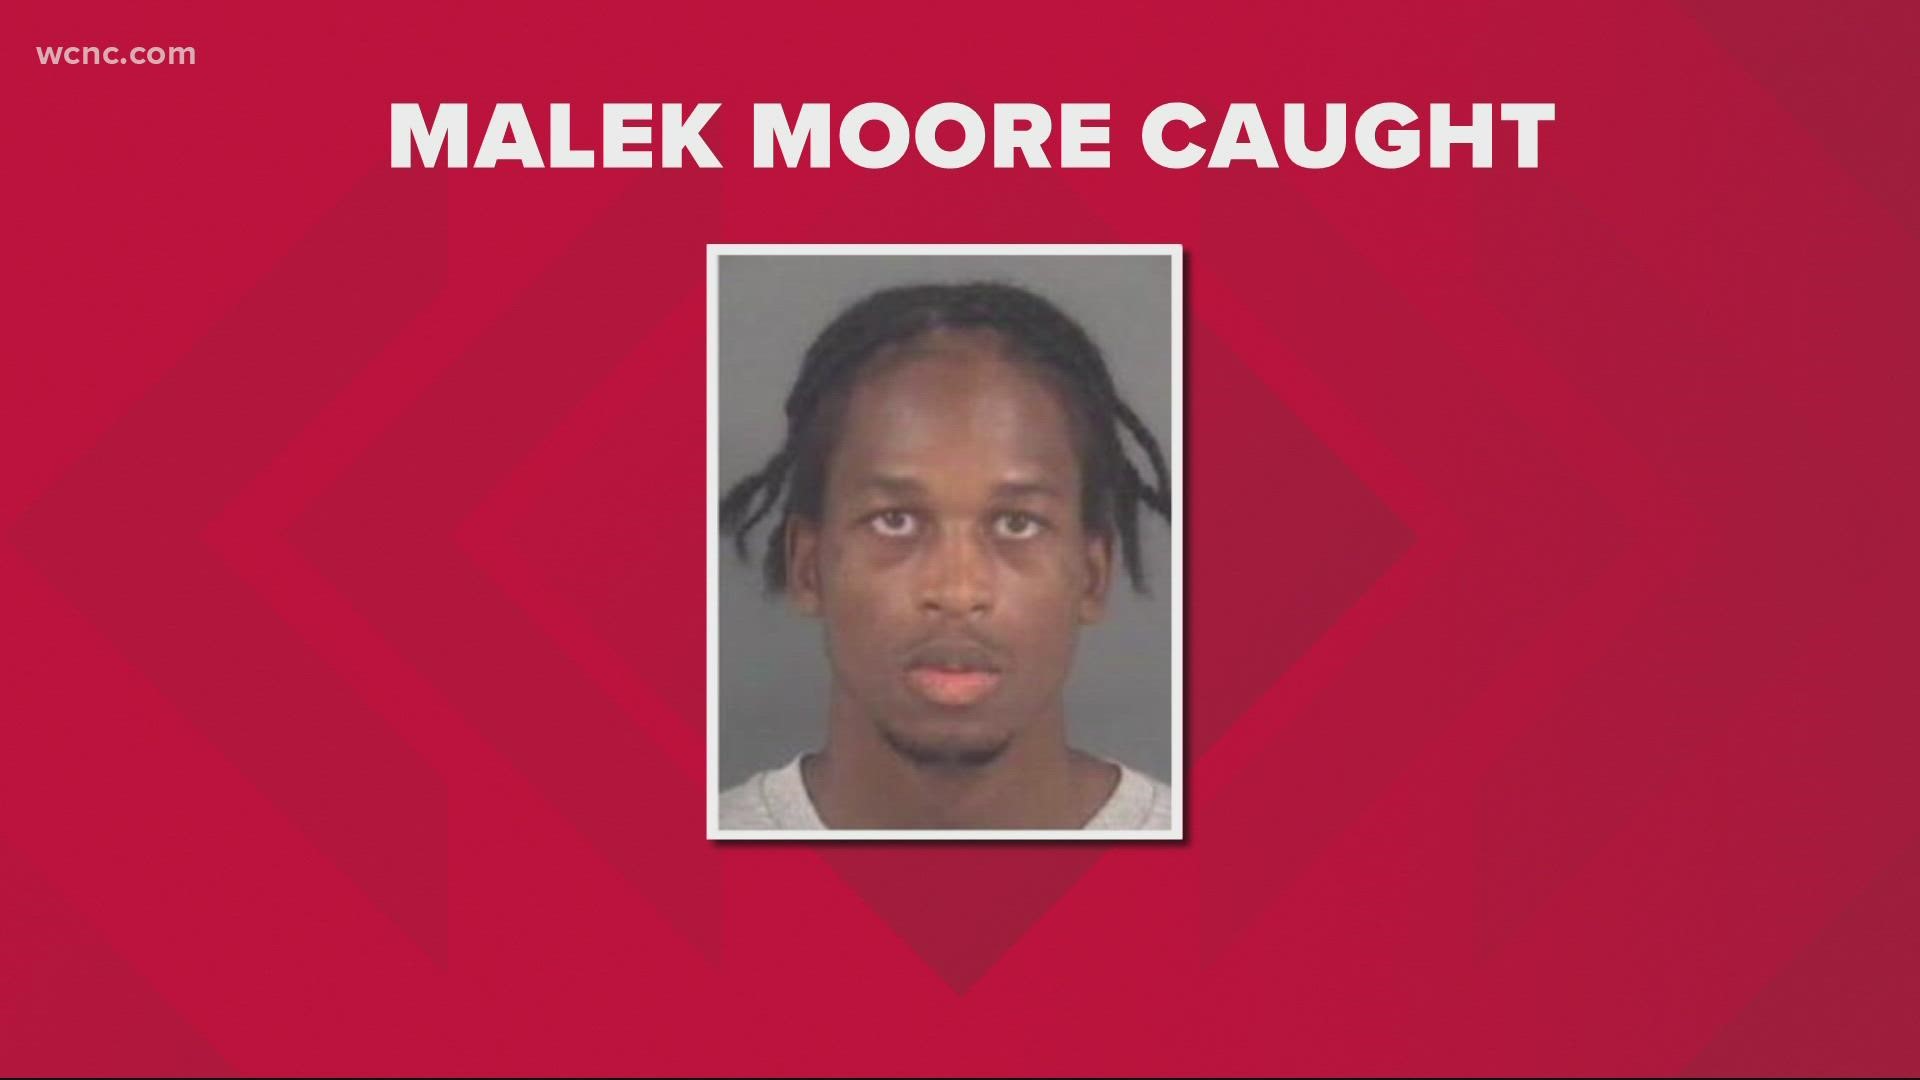 Malek Moore, 29, was wanted for first-degree murder in Greensboro and Charlotte.